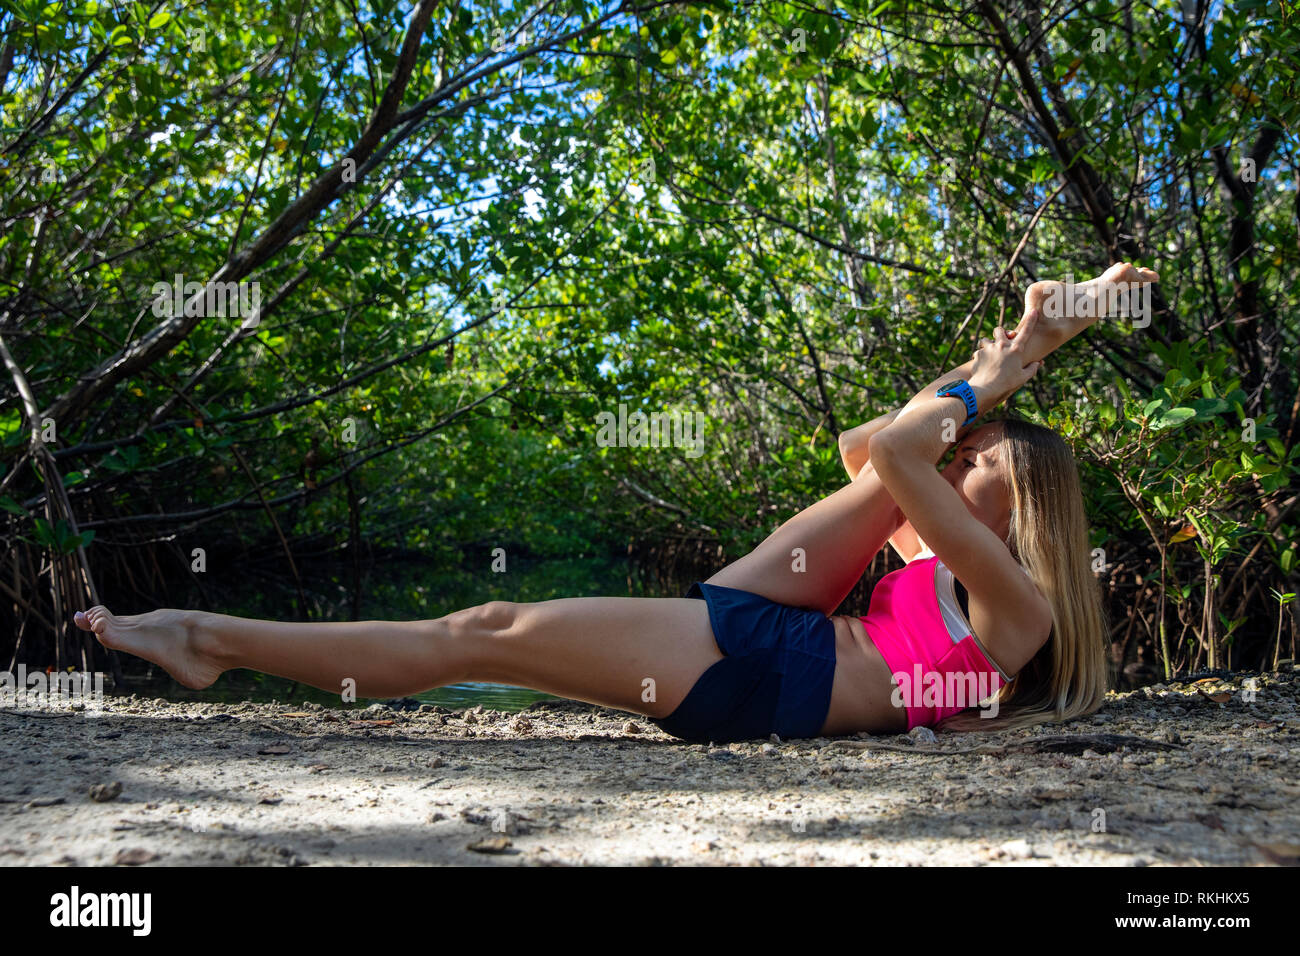 Young woman practicing yoga (Modified Reclining Hands to Leg Pose) in a natural setting - Fort Lauderdale, Florida, USA Stock Photo